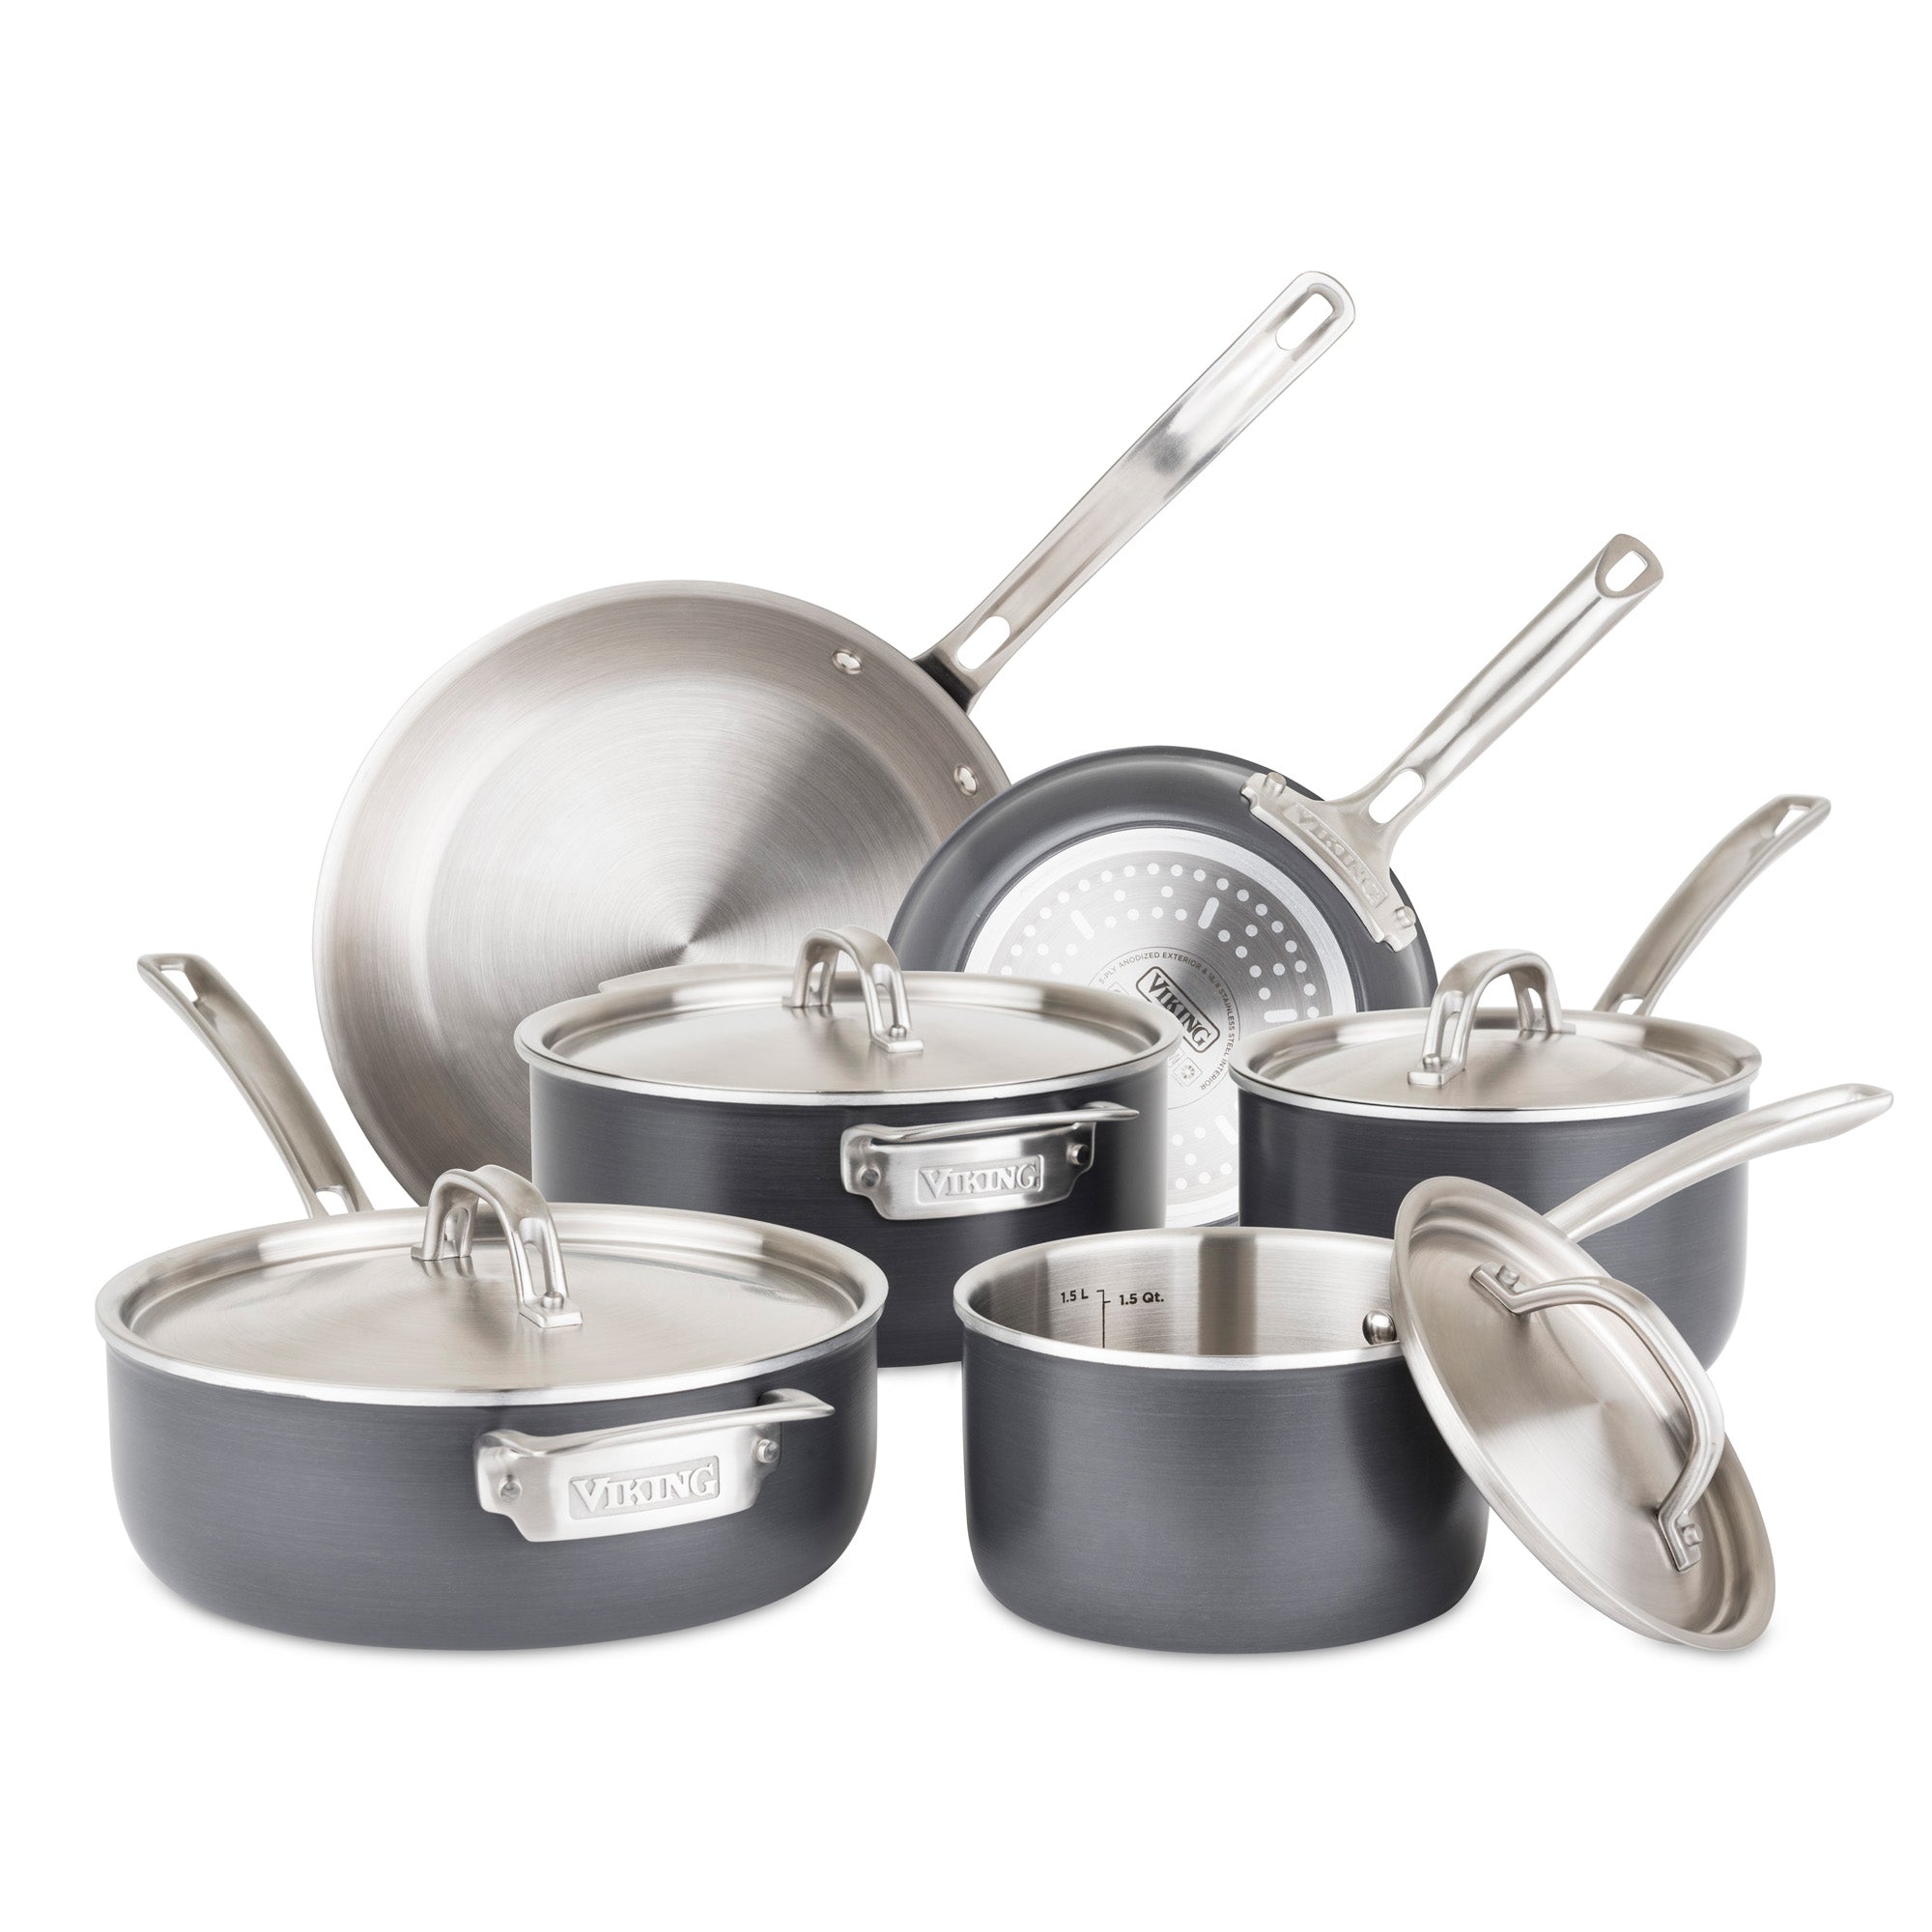 Viking 5-Ply 10-Piece Hard Anodized Stainless Steel Cookware Set with Stainless Lids